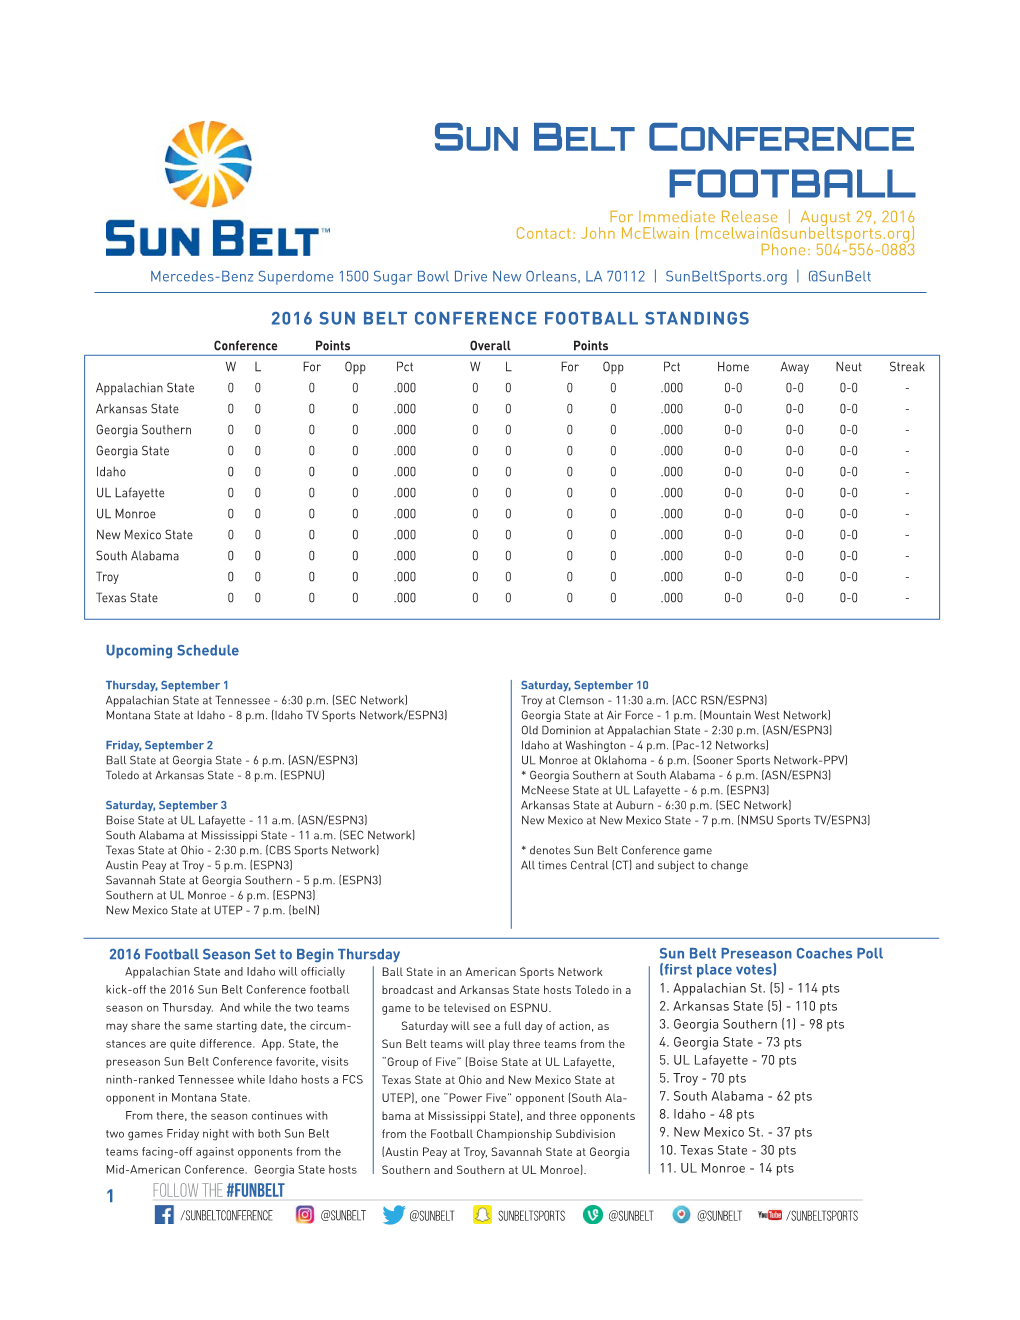 Sun Belt Conference Football Weekly News and Notes